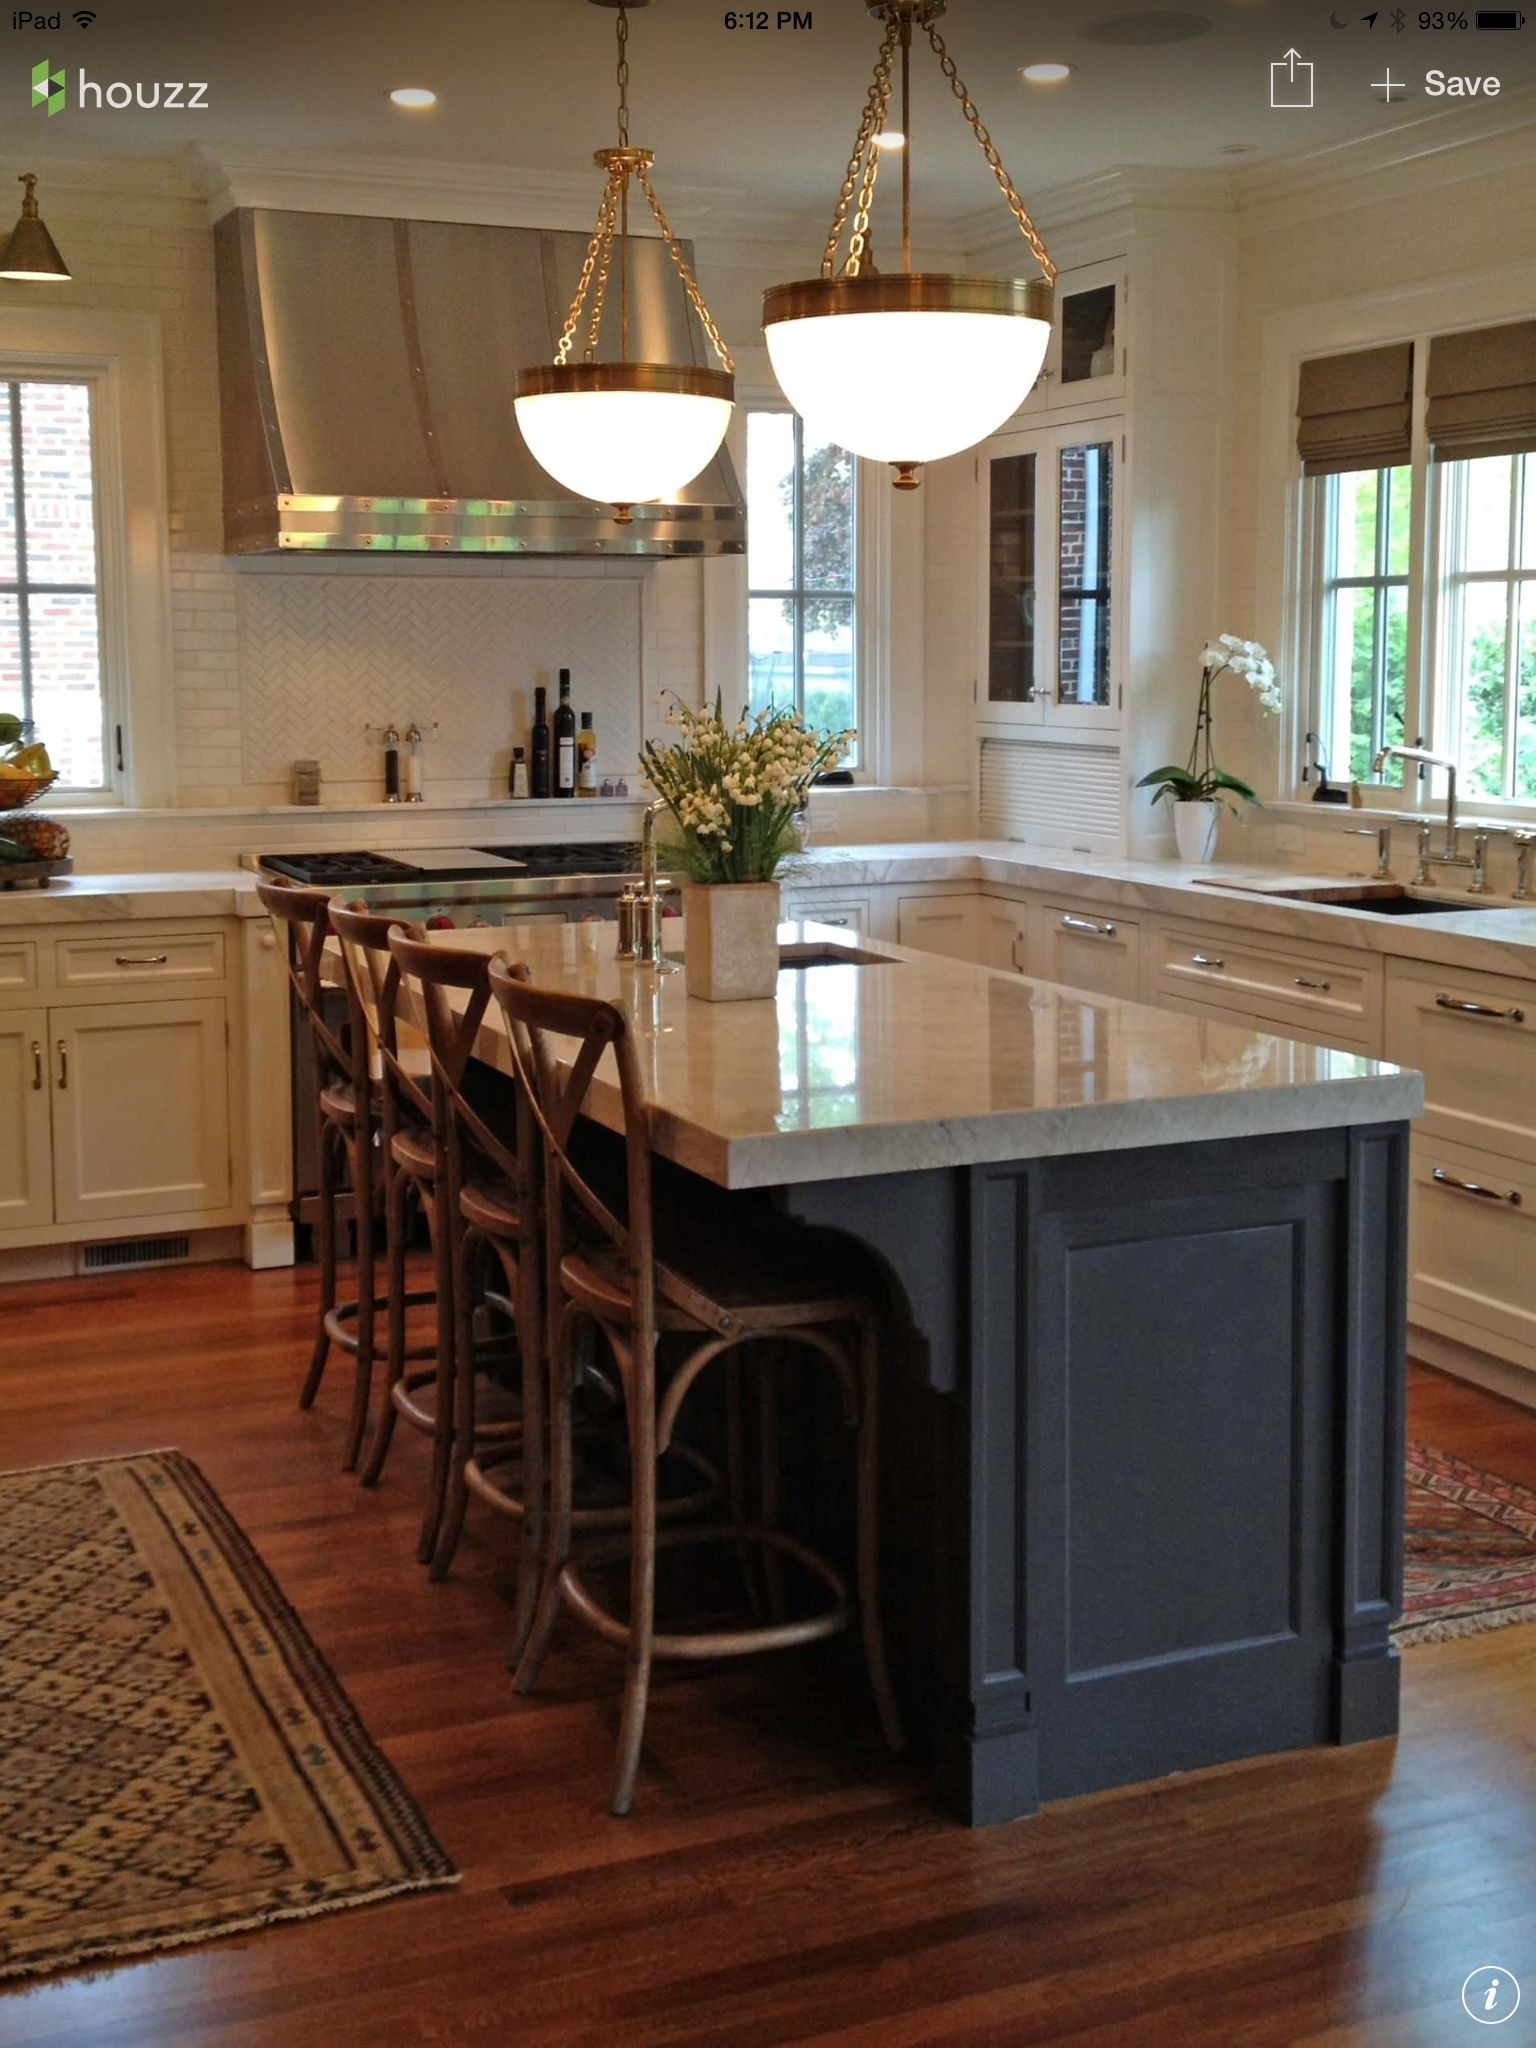 Open Kitchen Island With Seating Flash Sales, UP TO 20 OFF   www ...